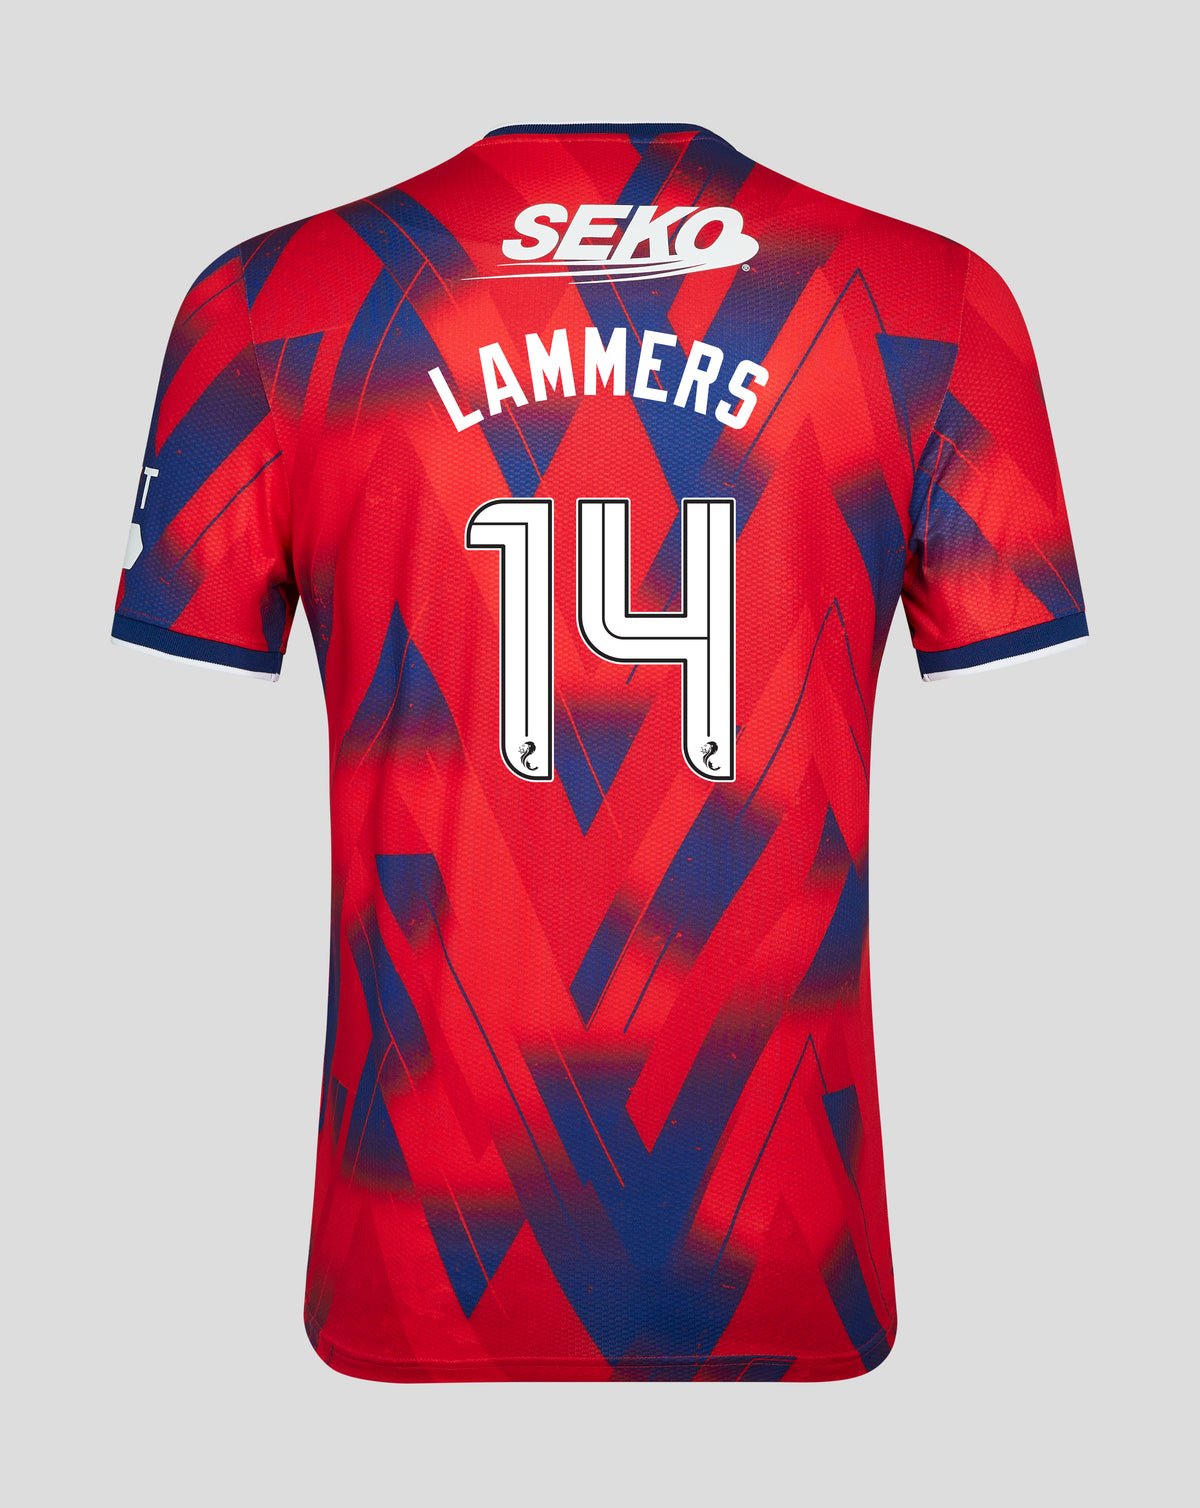 Lammers - Fourth Kit